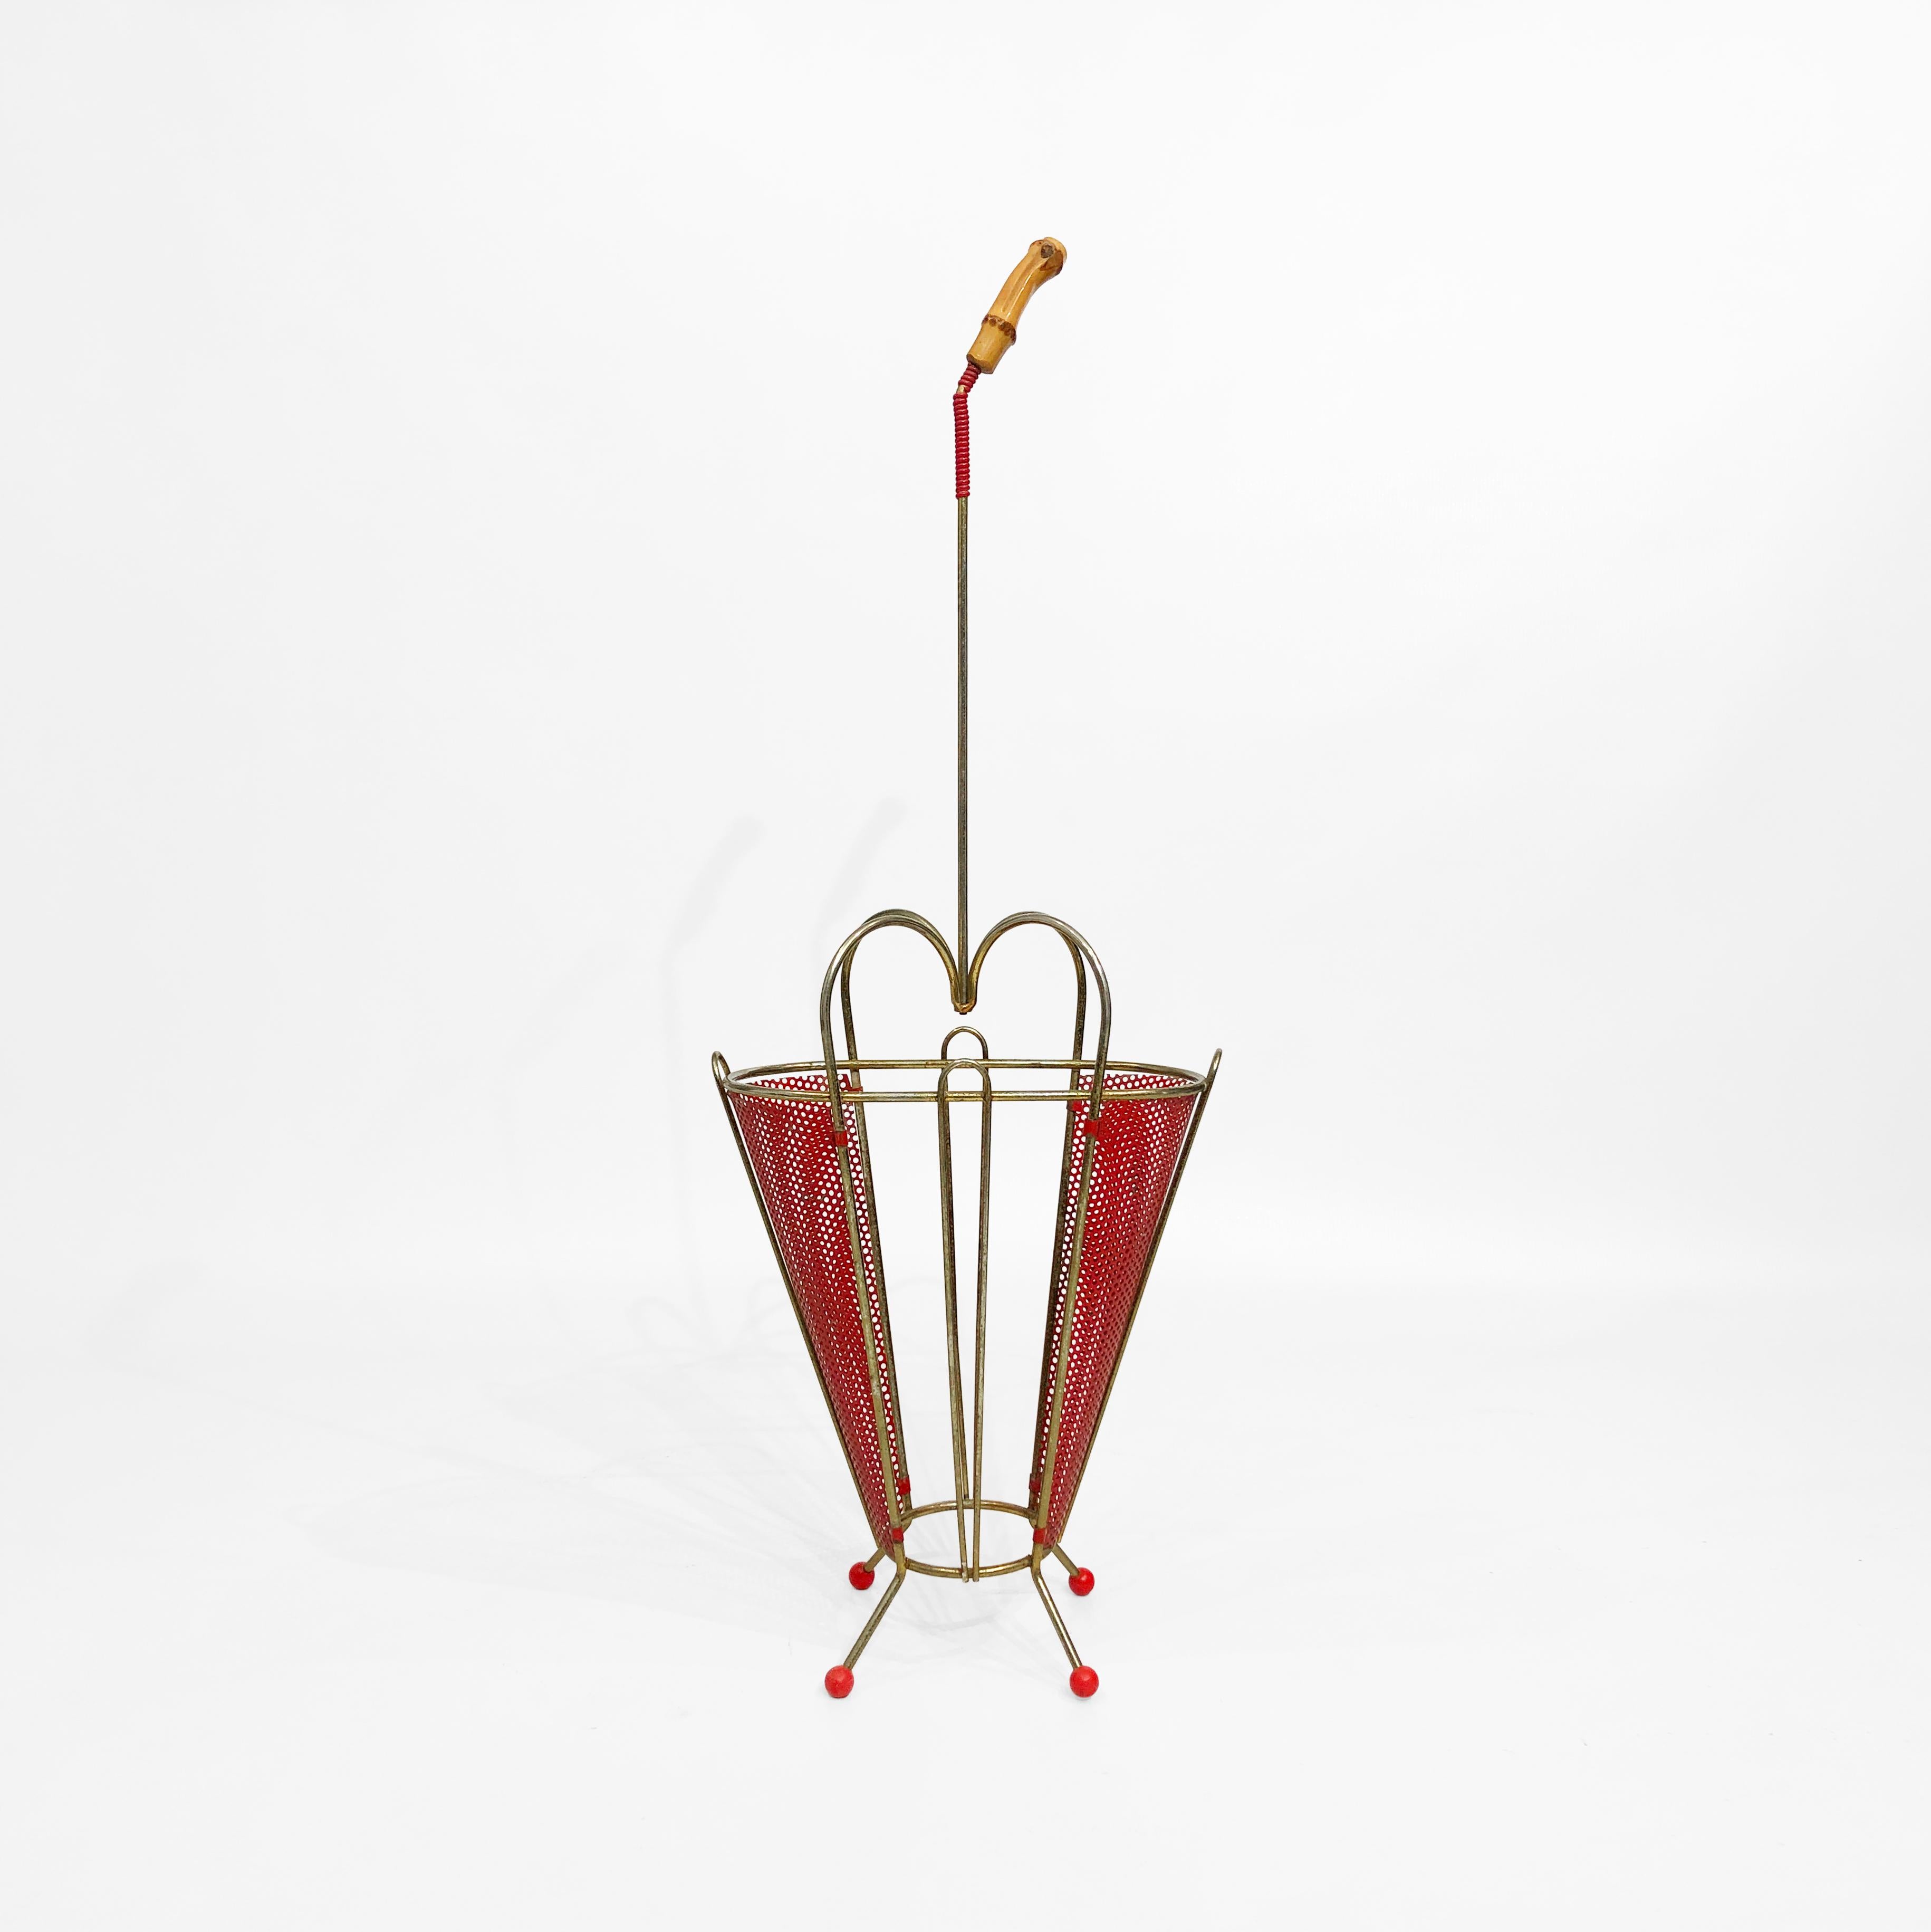 This modernist umbrella stand, attributed to renowned Franco-Hungarian designer Mathieu Matégot, features four plastic spherical feet, supporting a basket made of patinated brass and an organic, curved perforated metal sheet. The brass frame flows